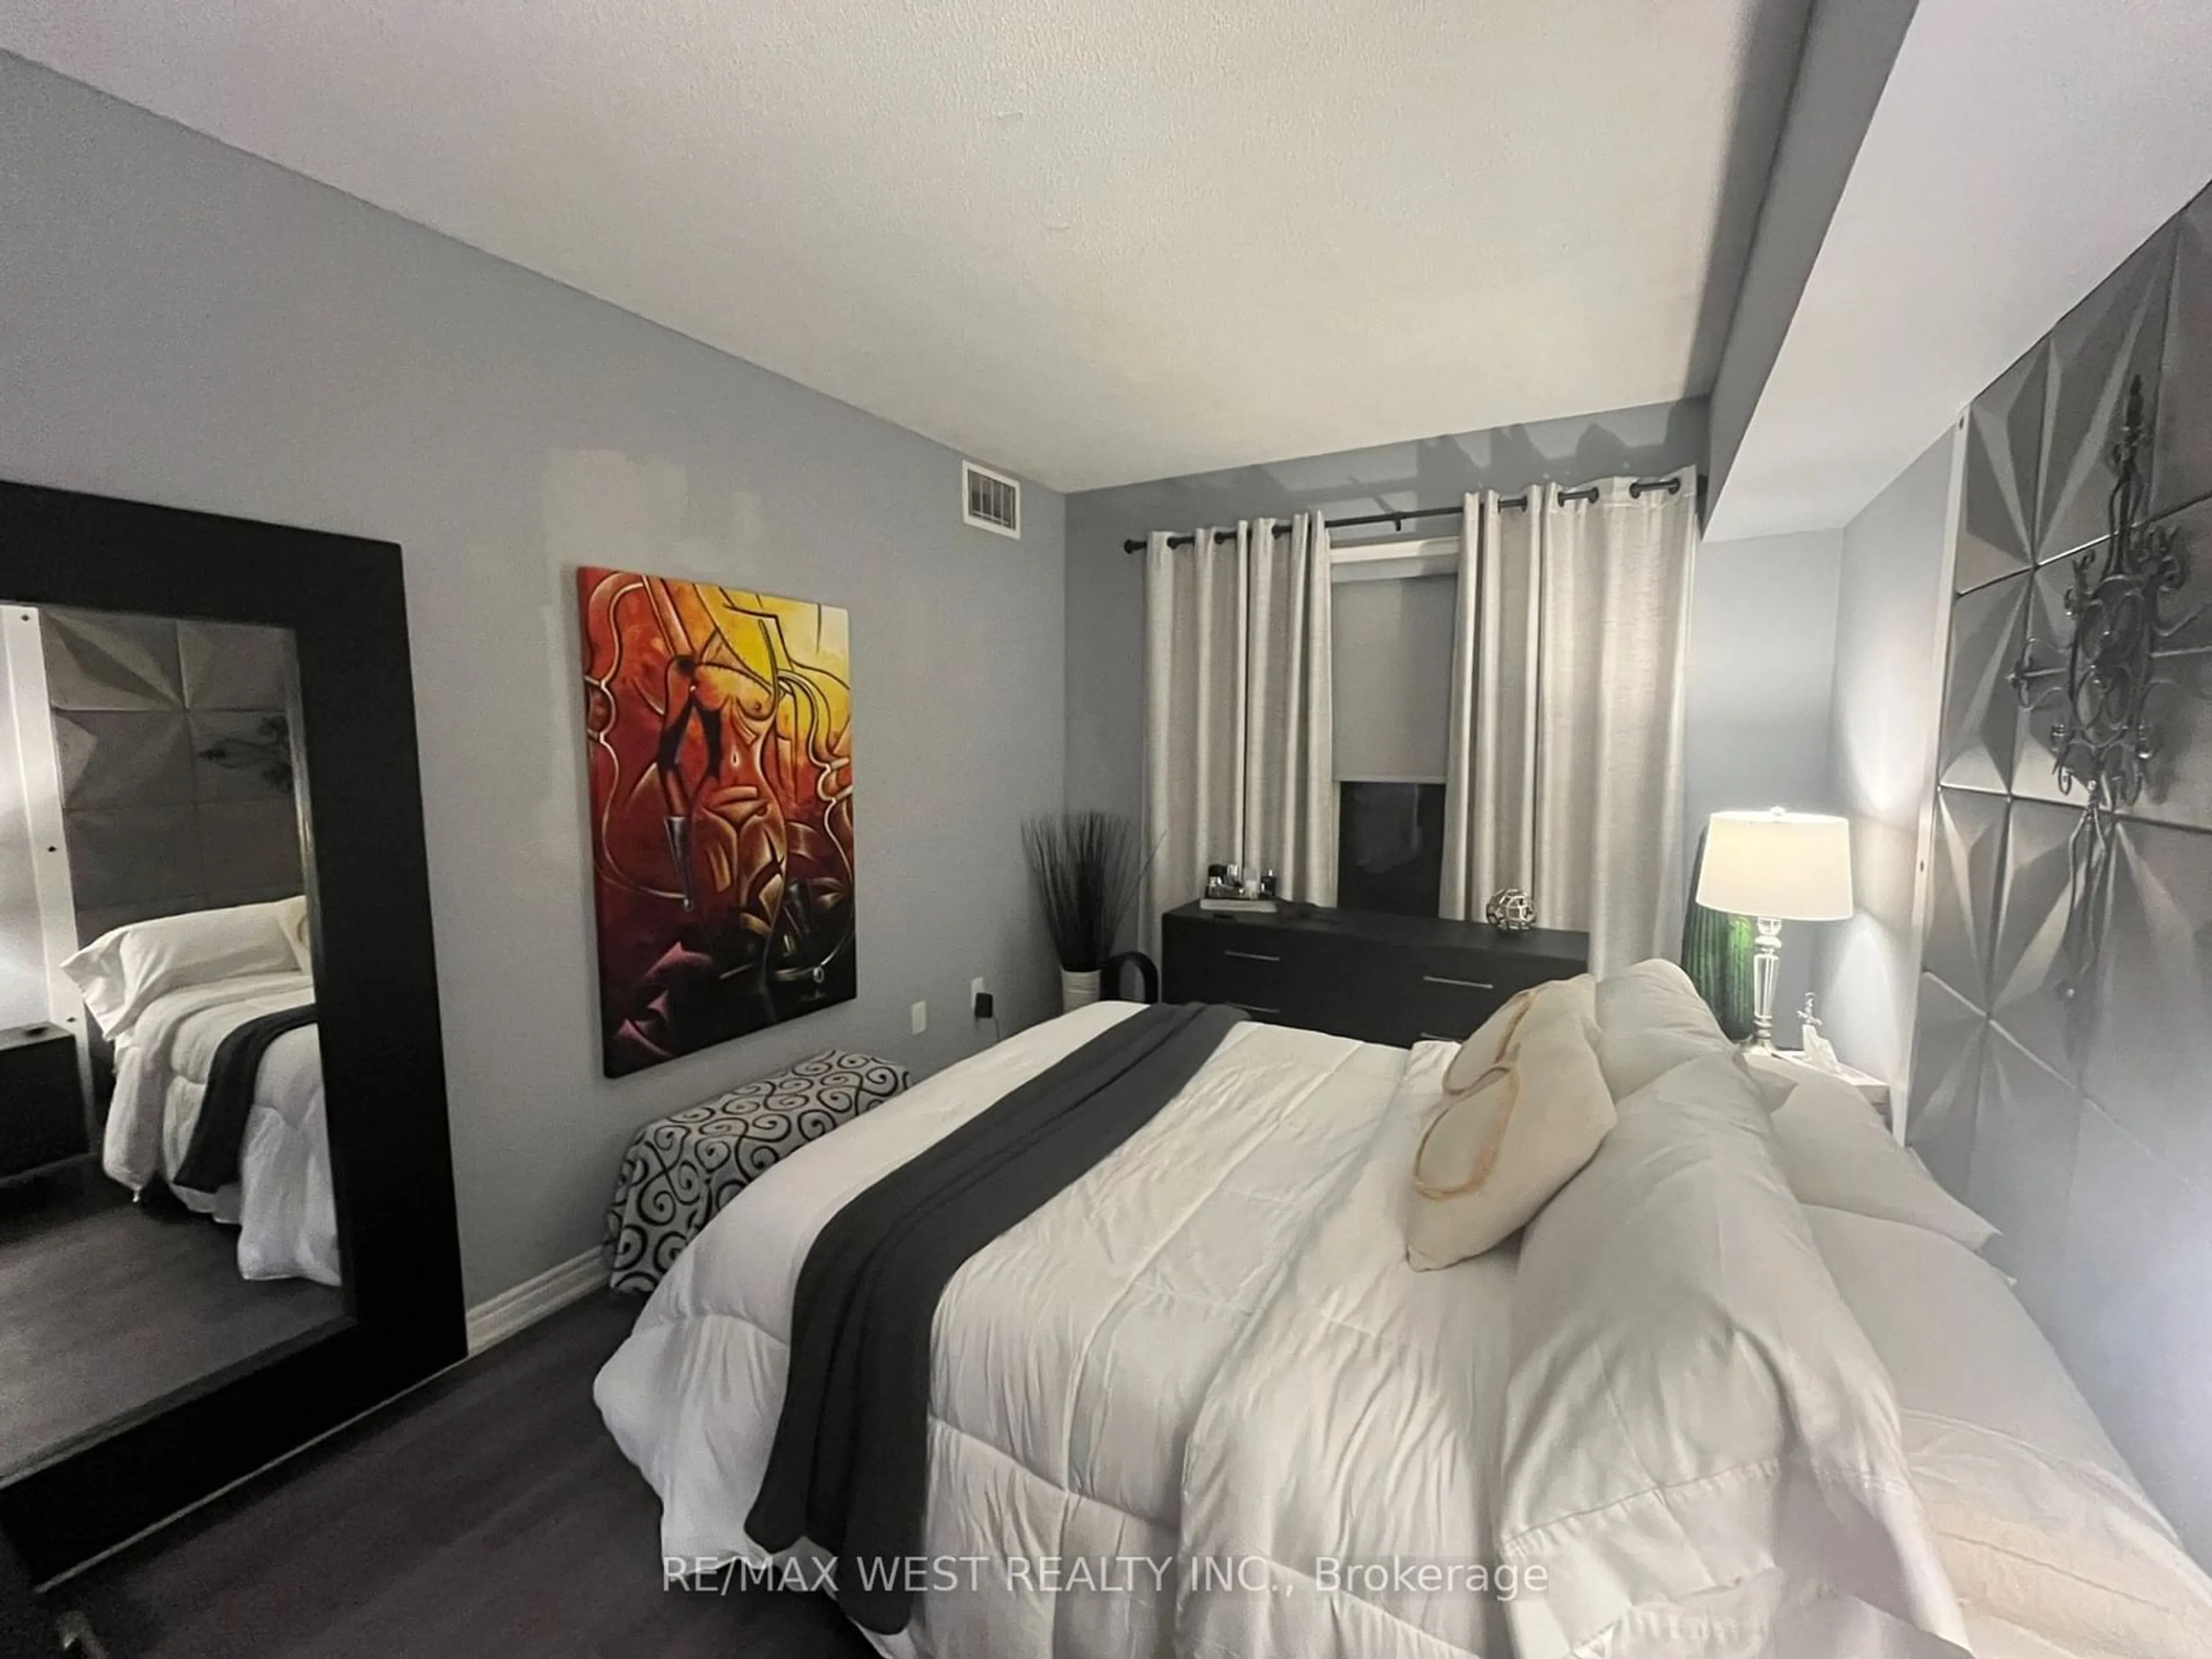 A pic of a room for 1000 Sheppard Ave #206, Toronto Ontario M3H 2T6